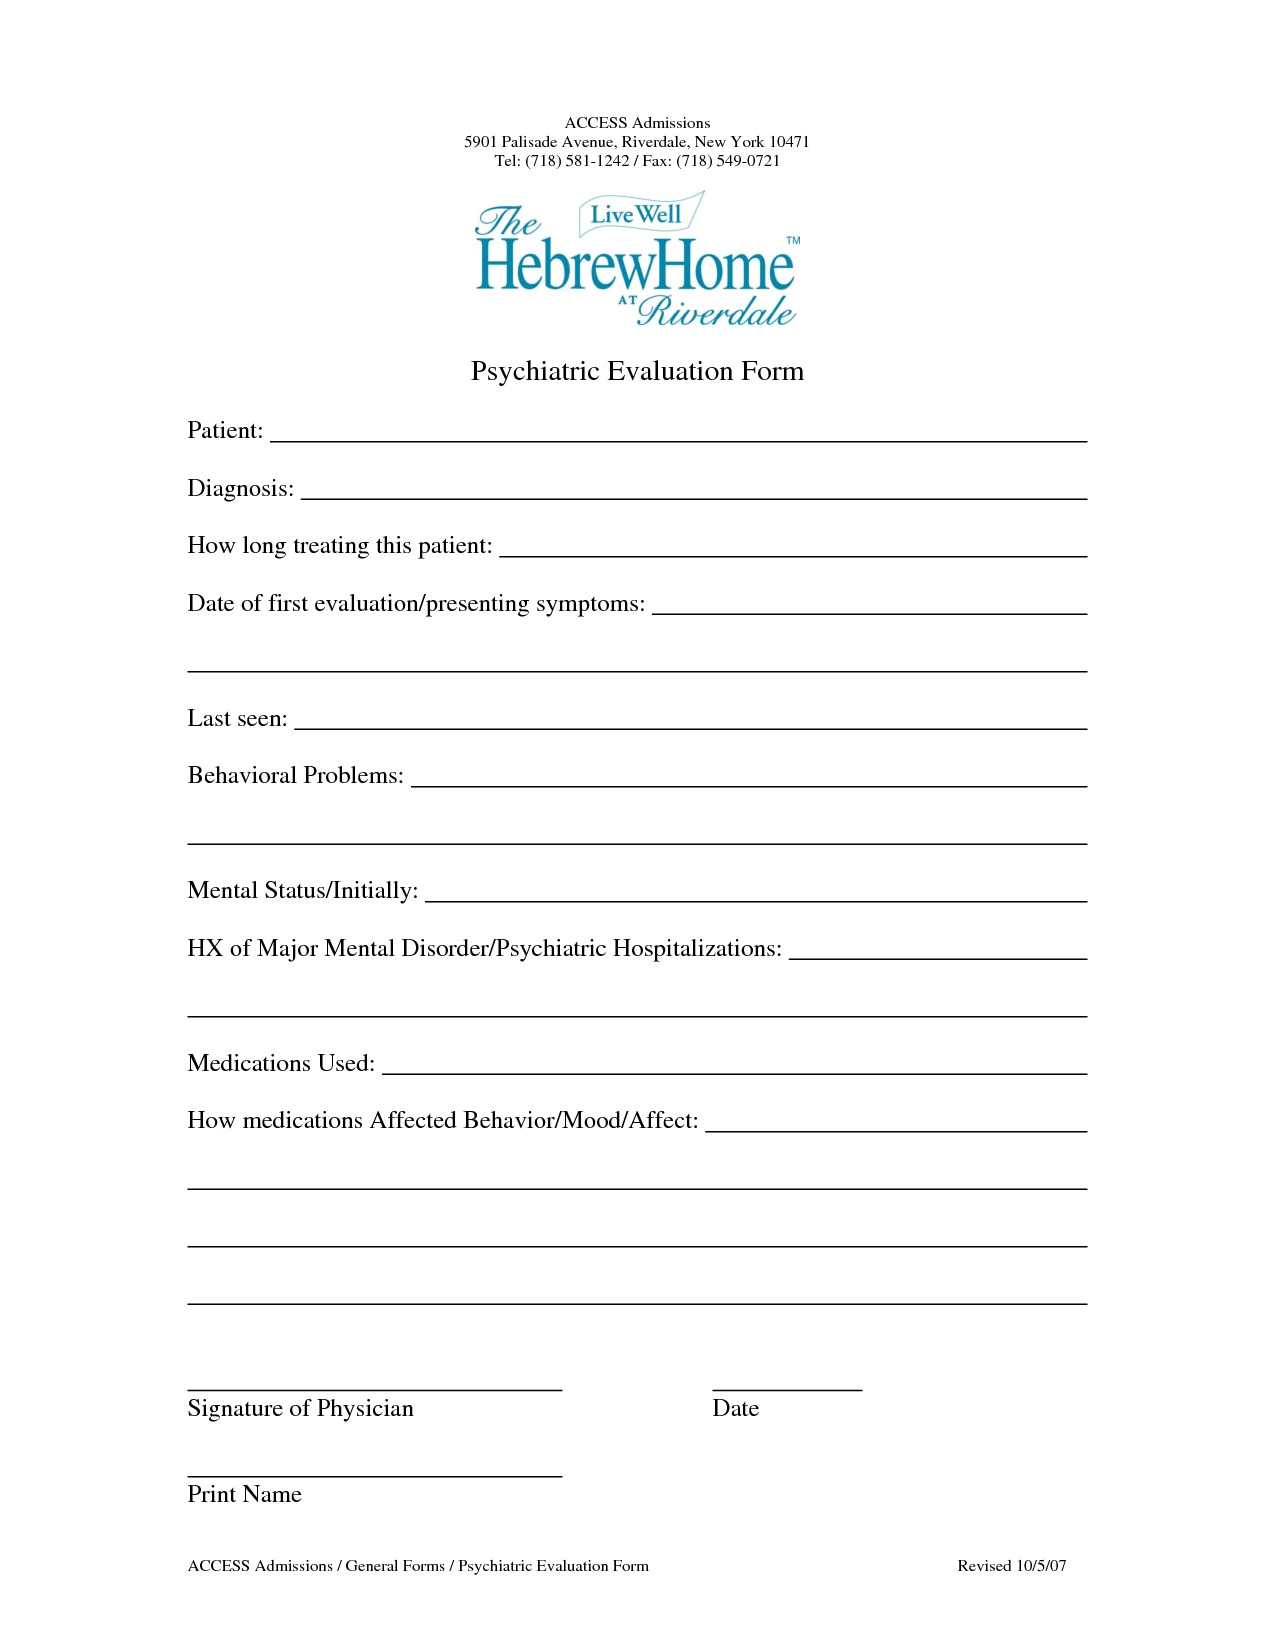 psychiatric evaluation form template